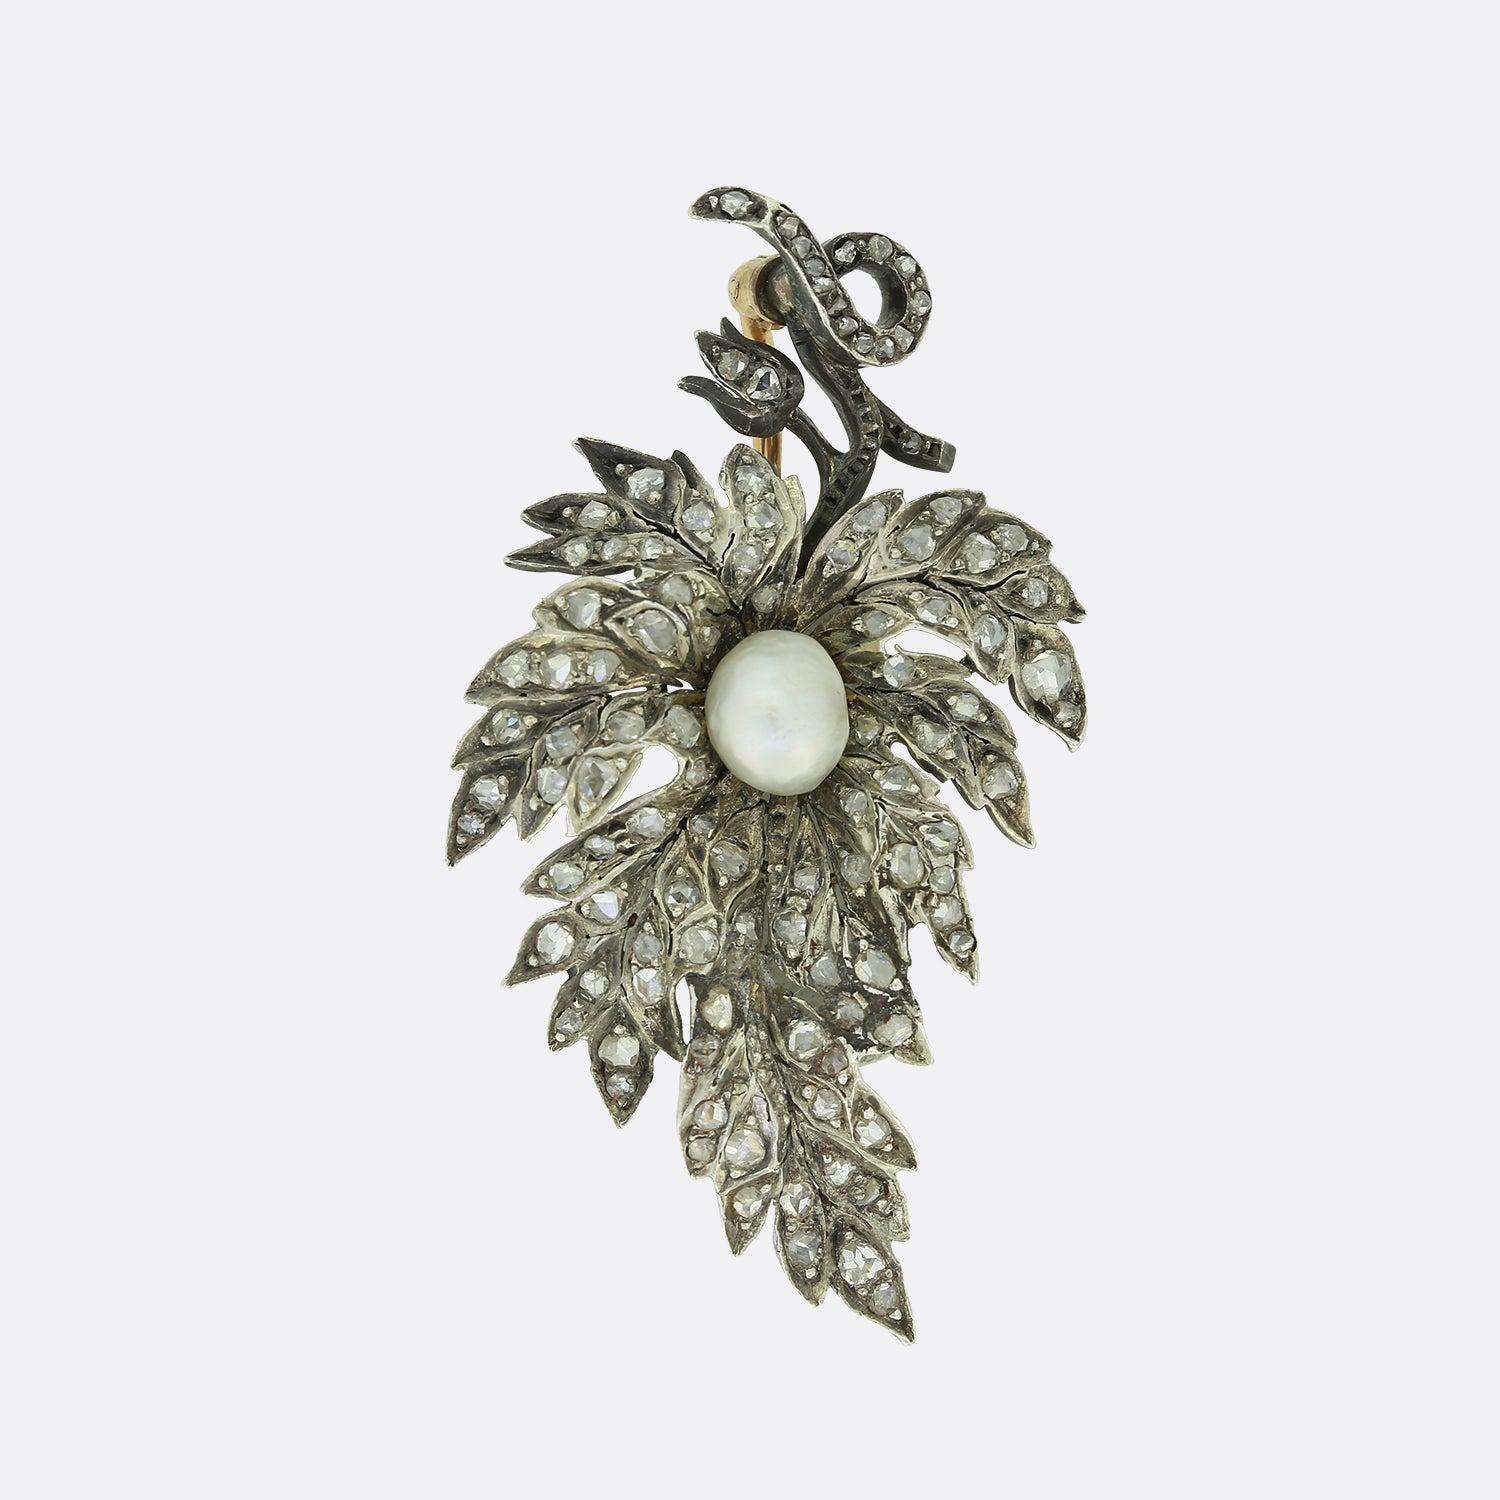 This is a truly wonderful Victorian era diamond brooch. The brooch features a large flower which has been set with an array of rose cut diamonds with a large central natural pearl. The stem and petal of the flower have also been set with more rose